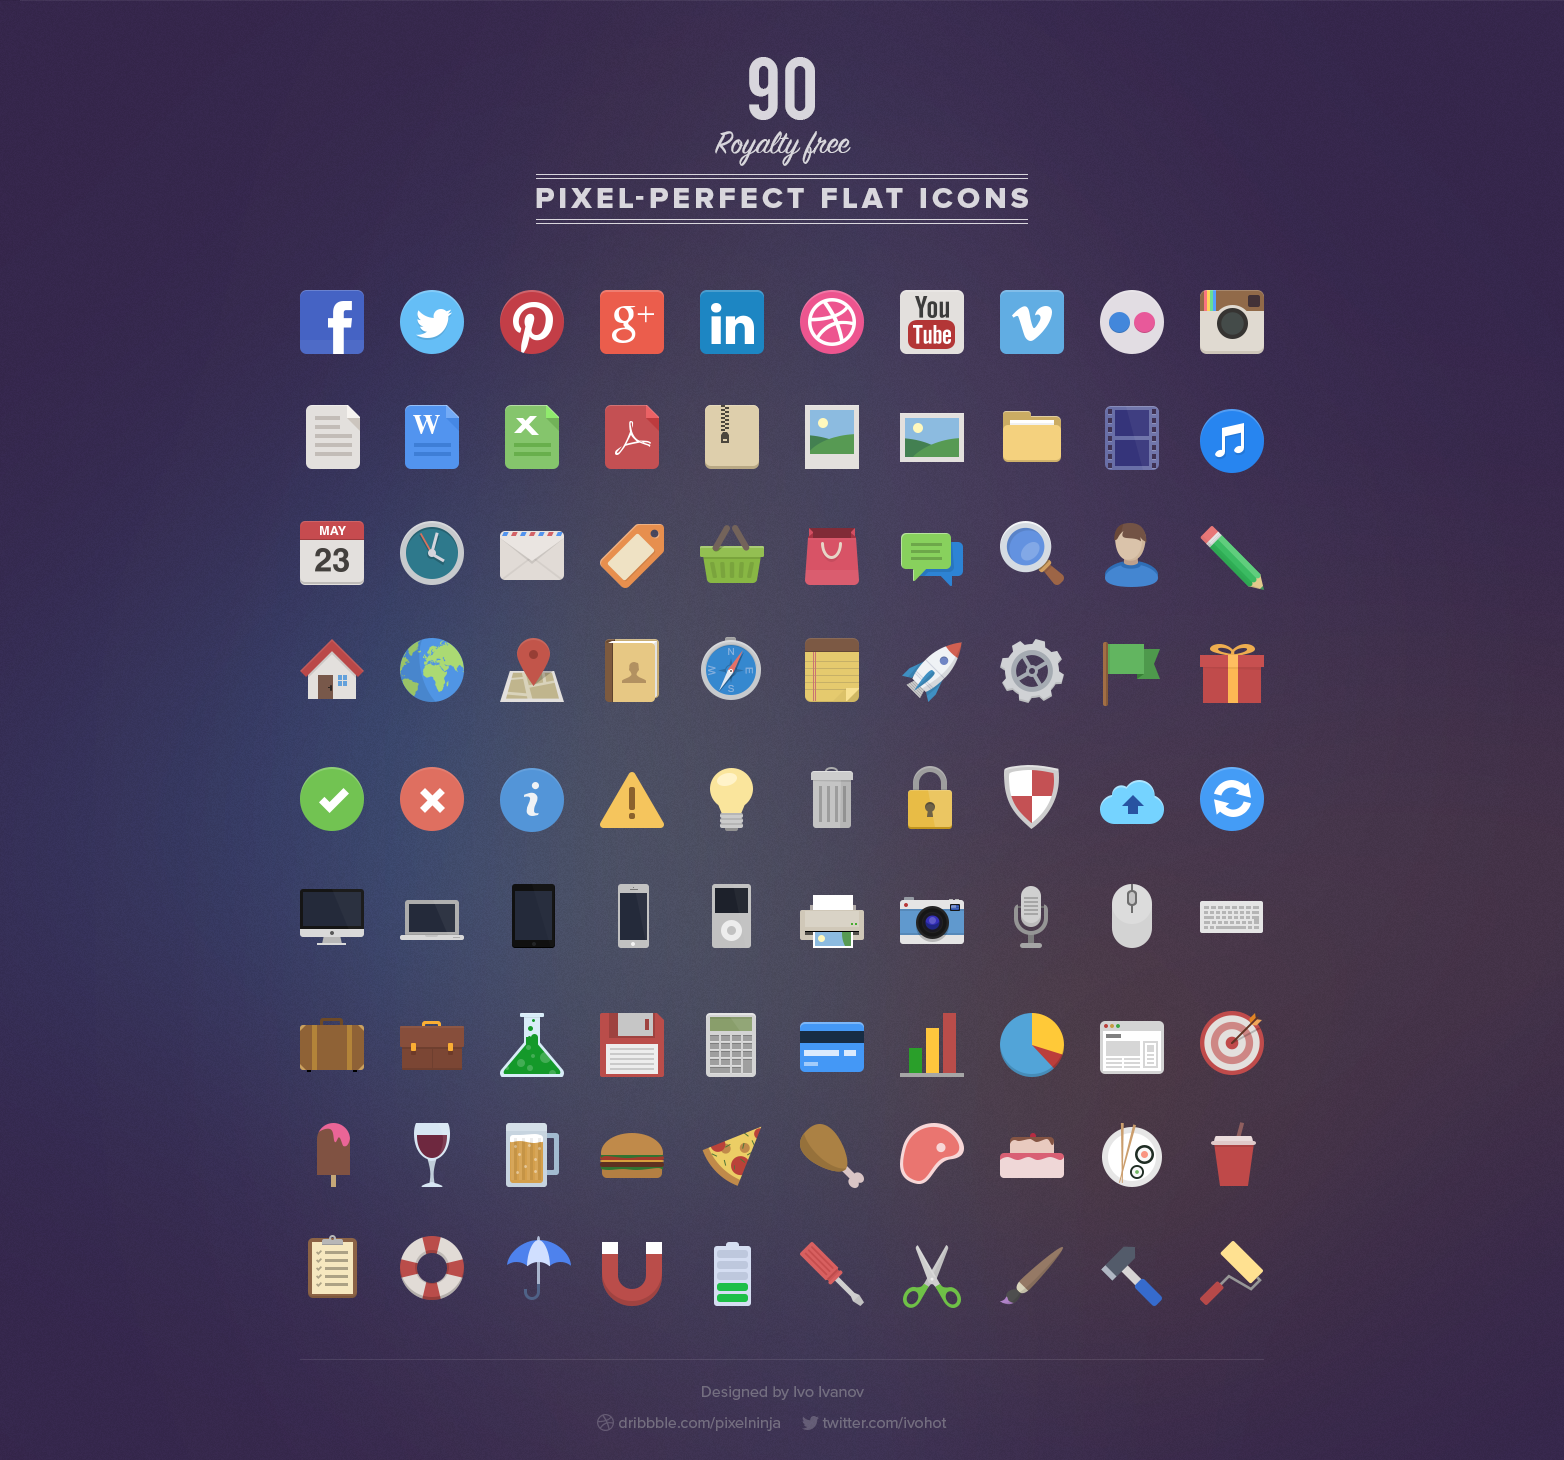 11 Royalty Free Icons Images